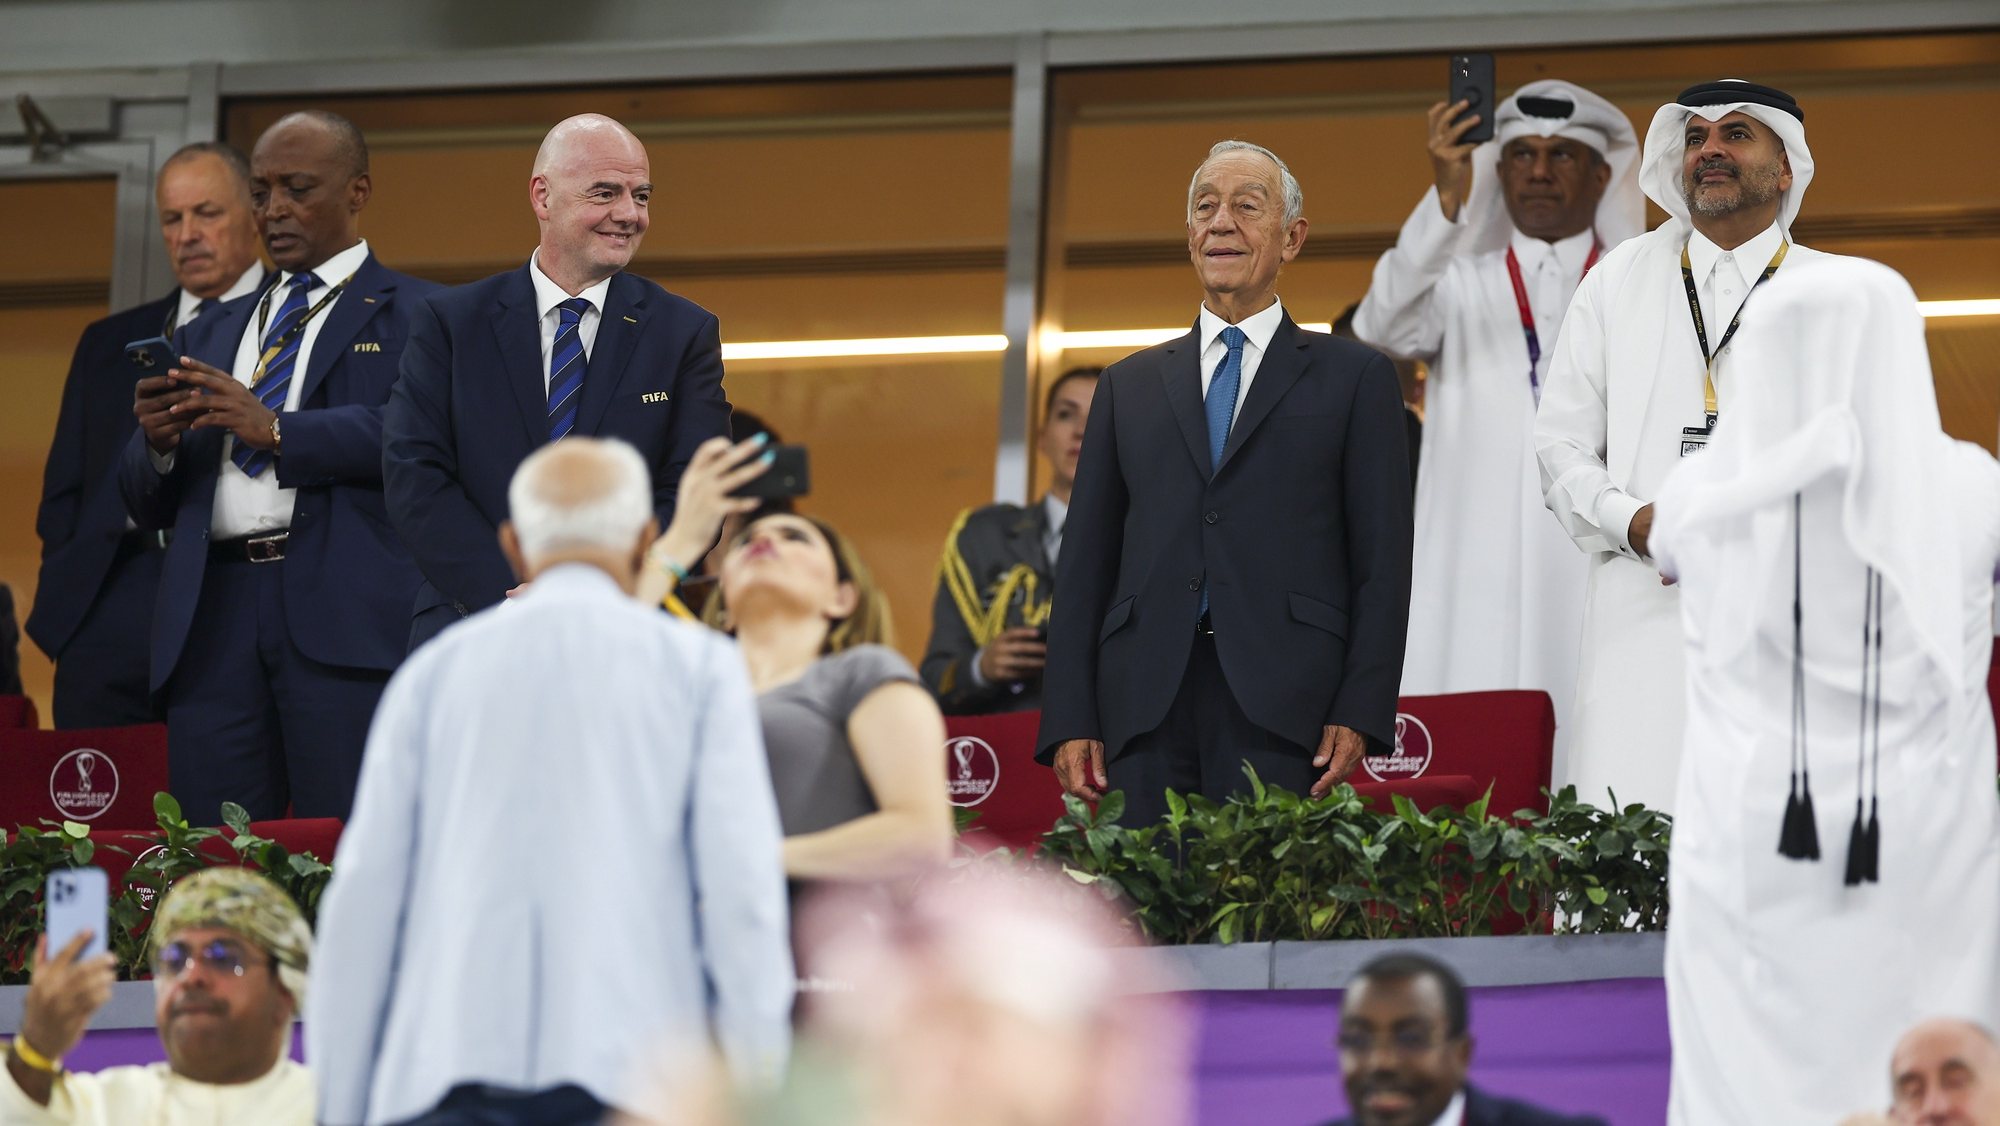 Portugal President Marcelo Rebelo de Sousa (3R) cheers prior to the FIFA World Cup 2022 group H match between Portugal and Ghana at Stadium 974, in Doha, Qatar, 24 November 2022. JOSE SENA GOULAO/LUSA